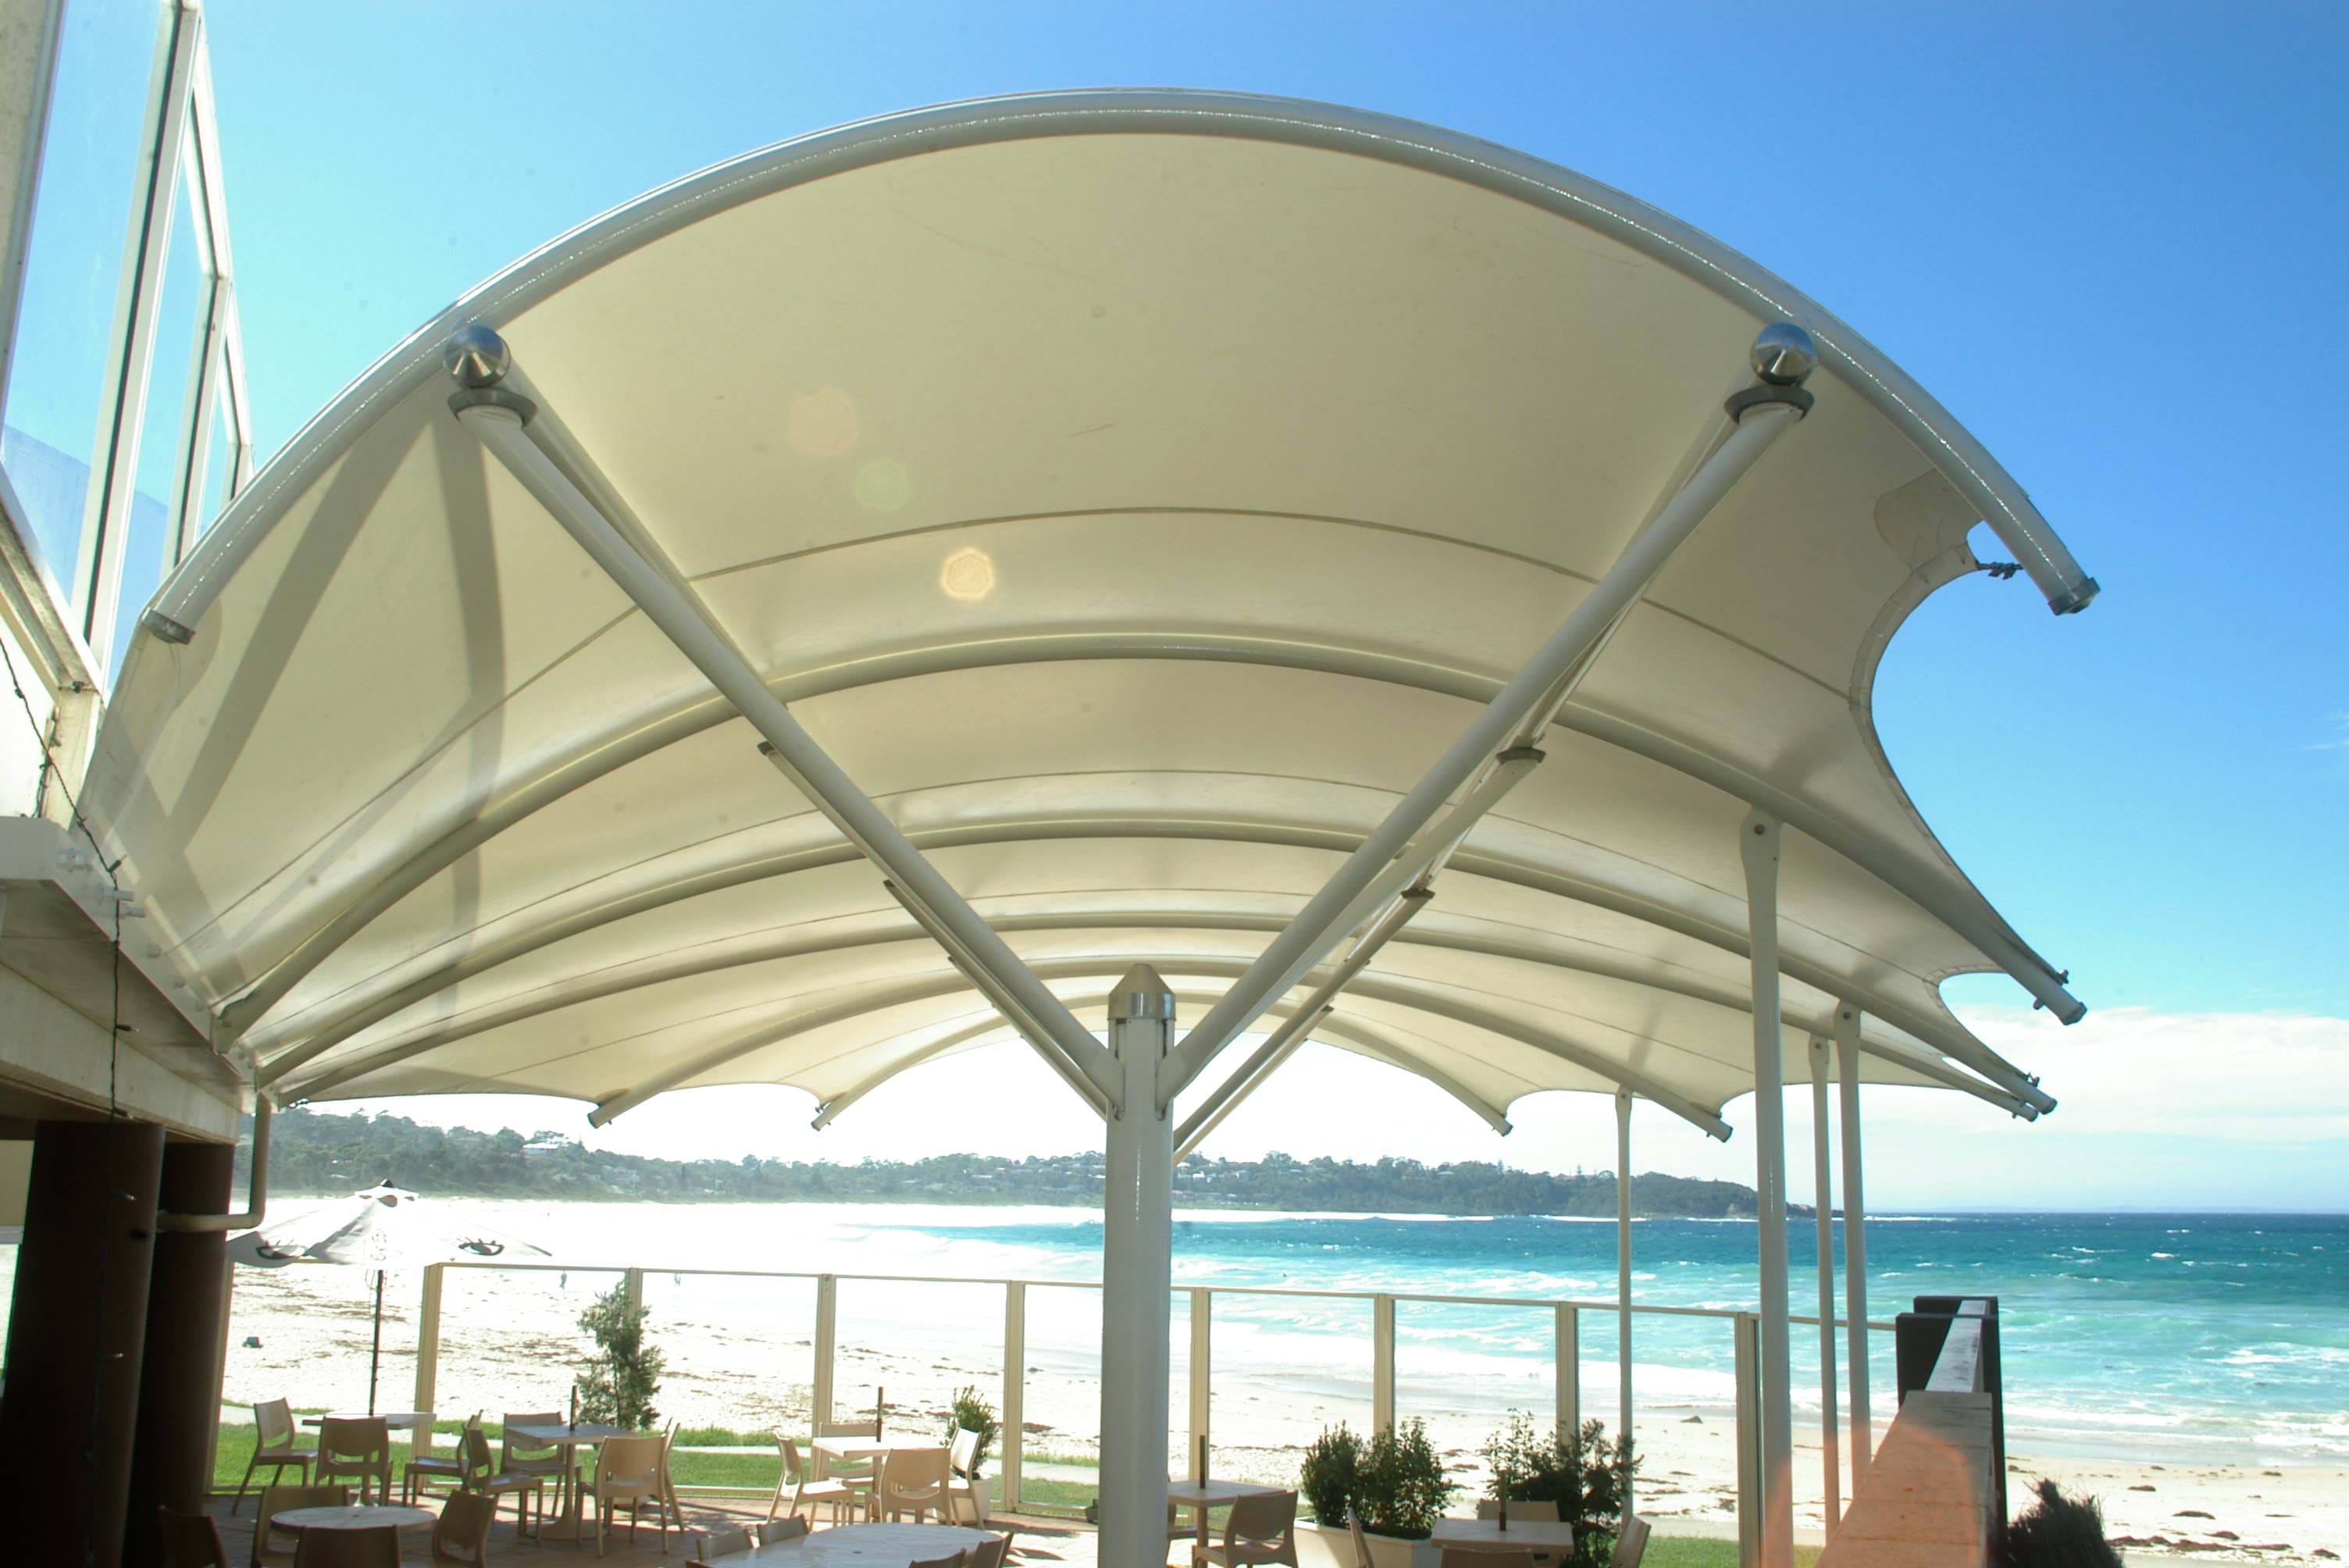  Membranes  for Awnings  Canopies 